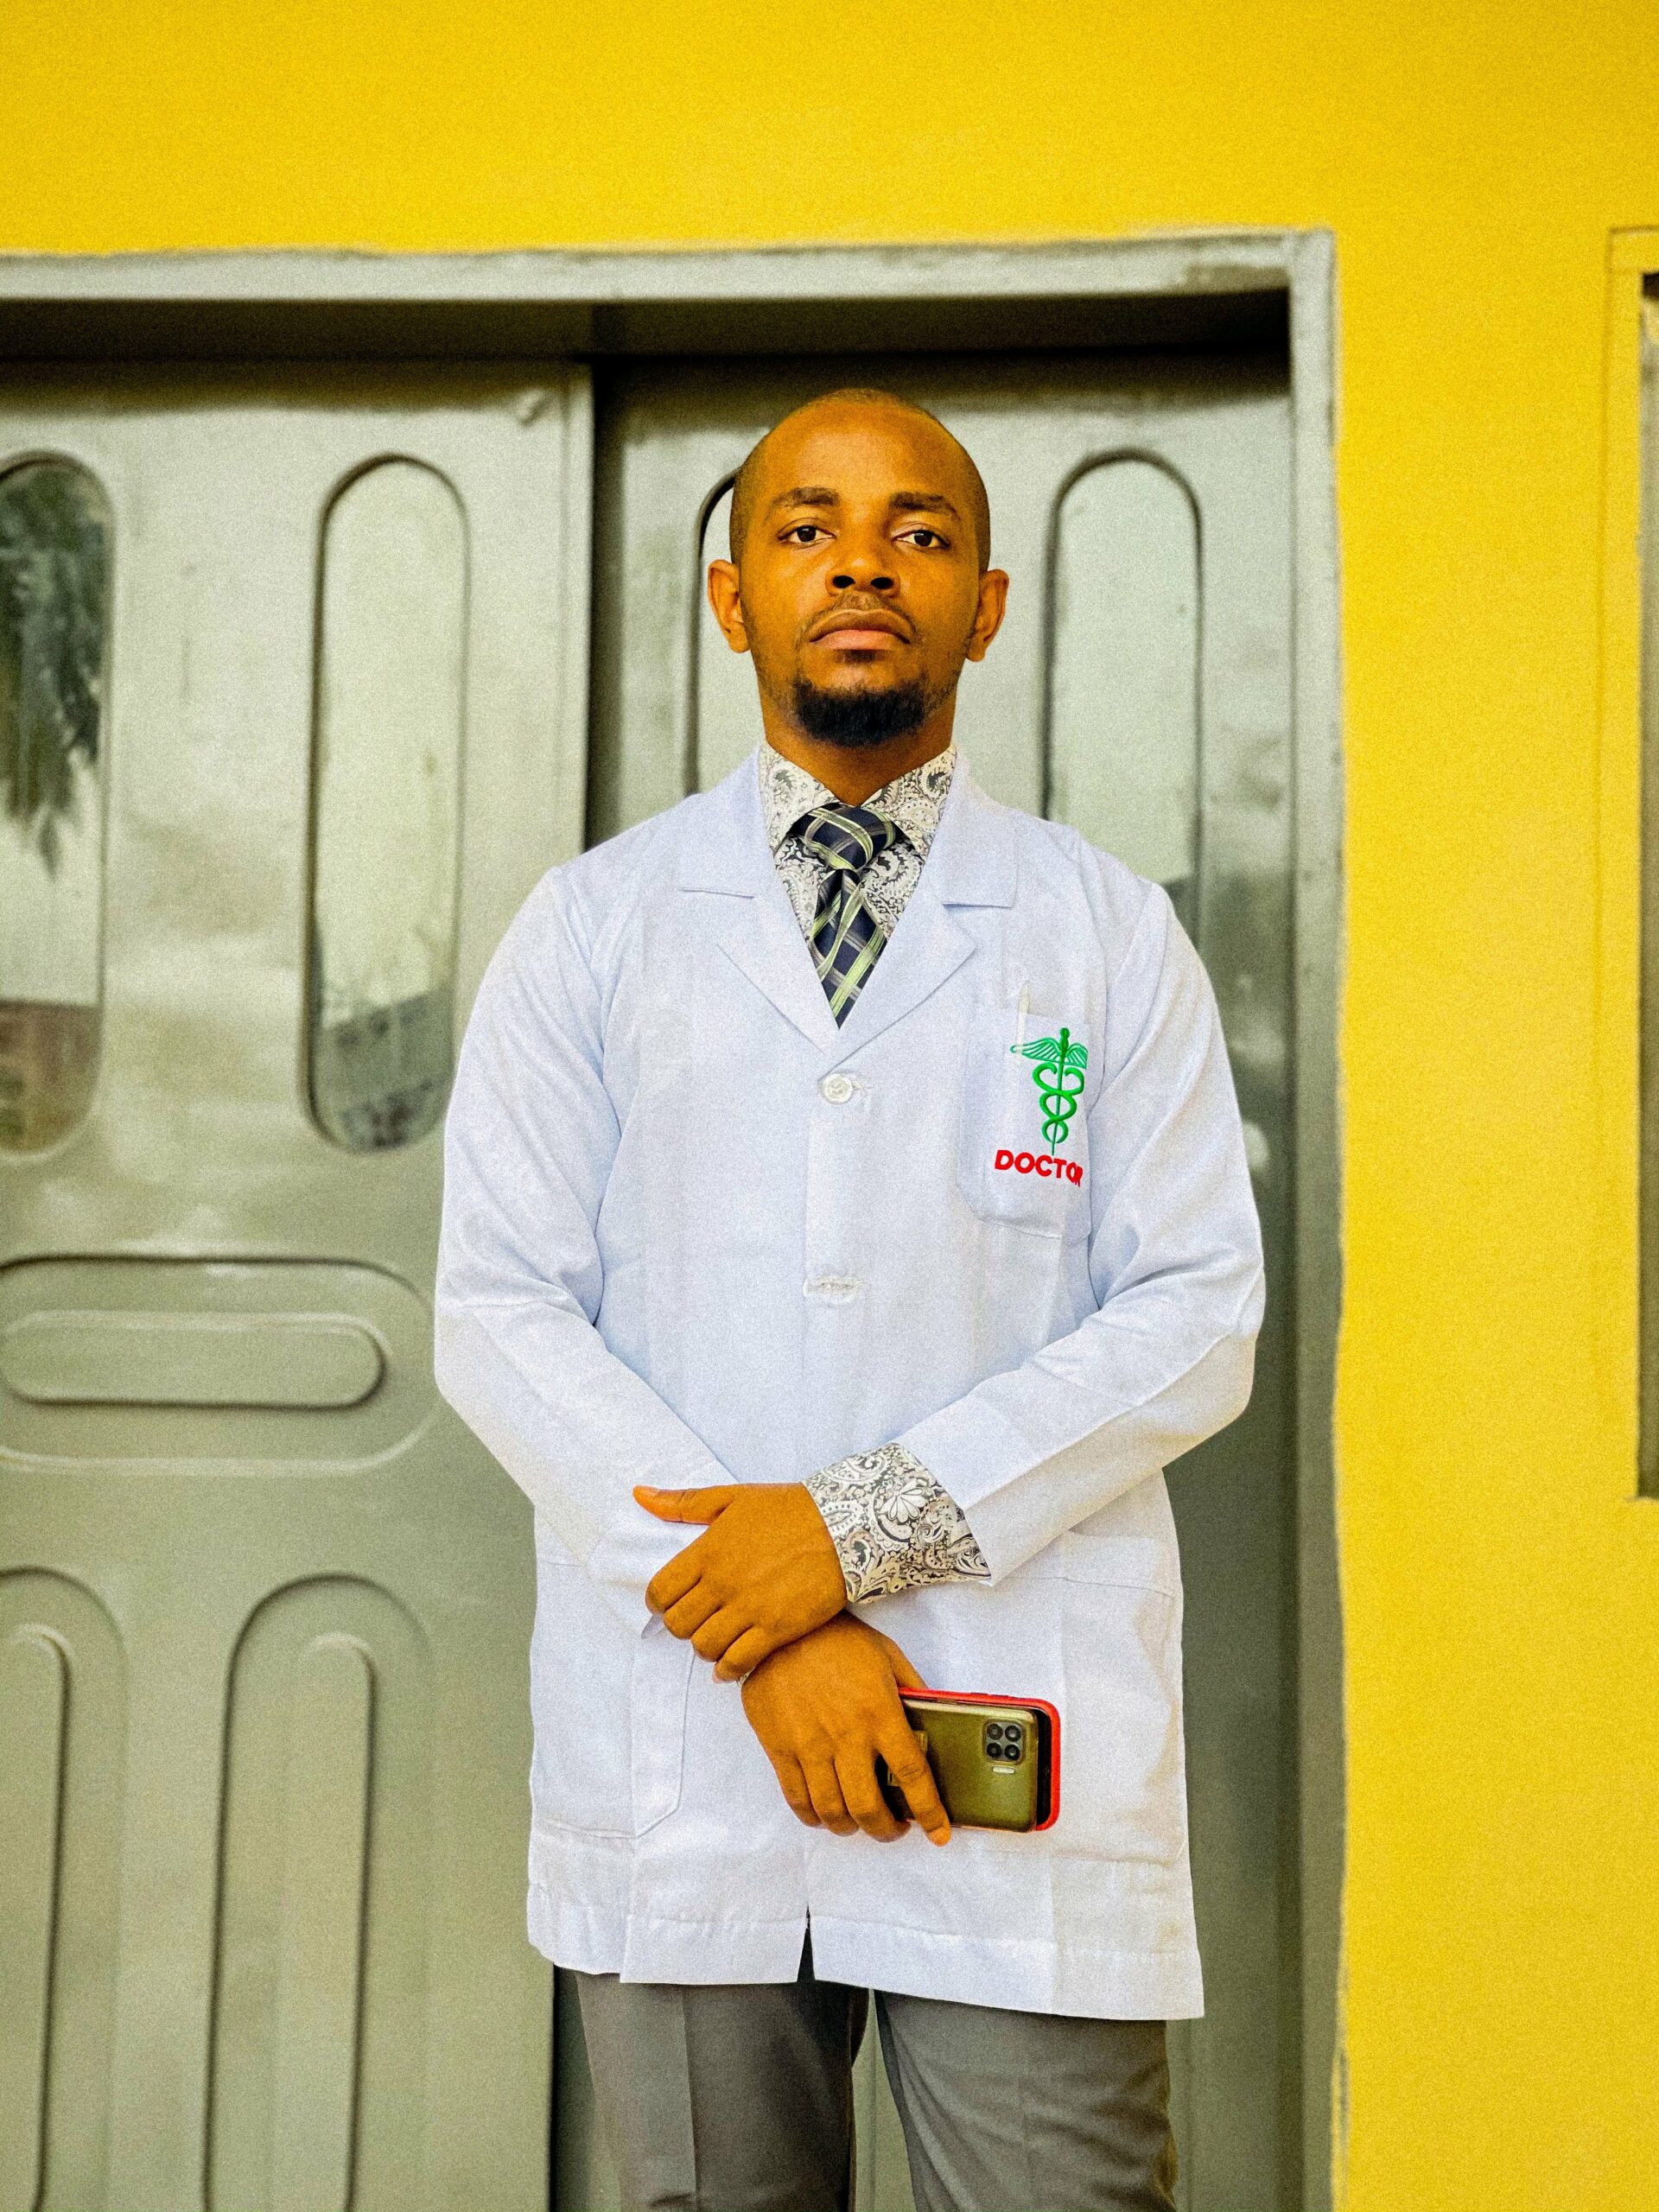 Nigerian doctor first class degree computer science 